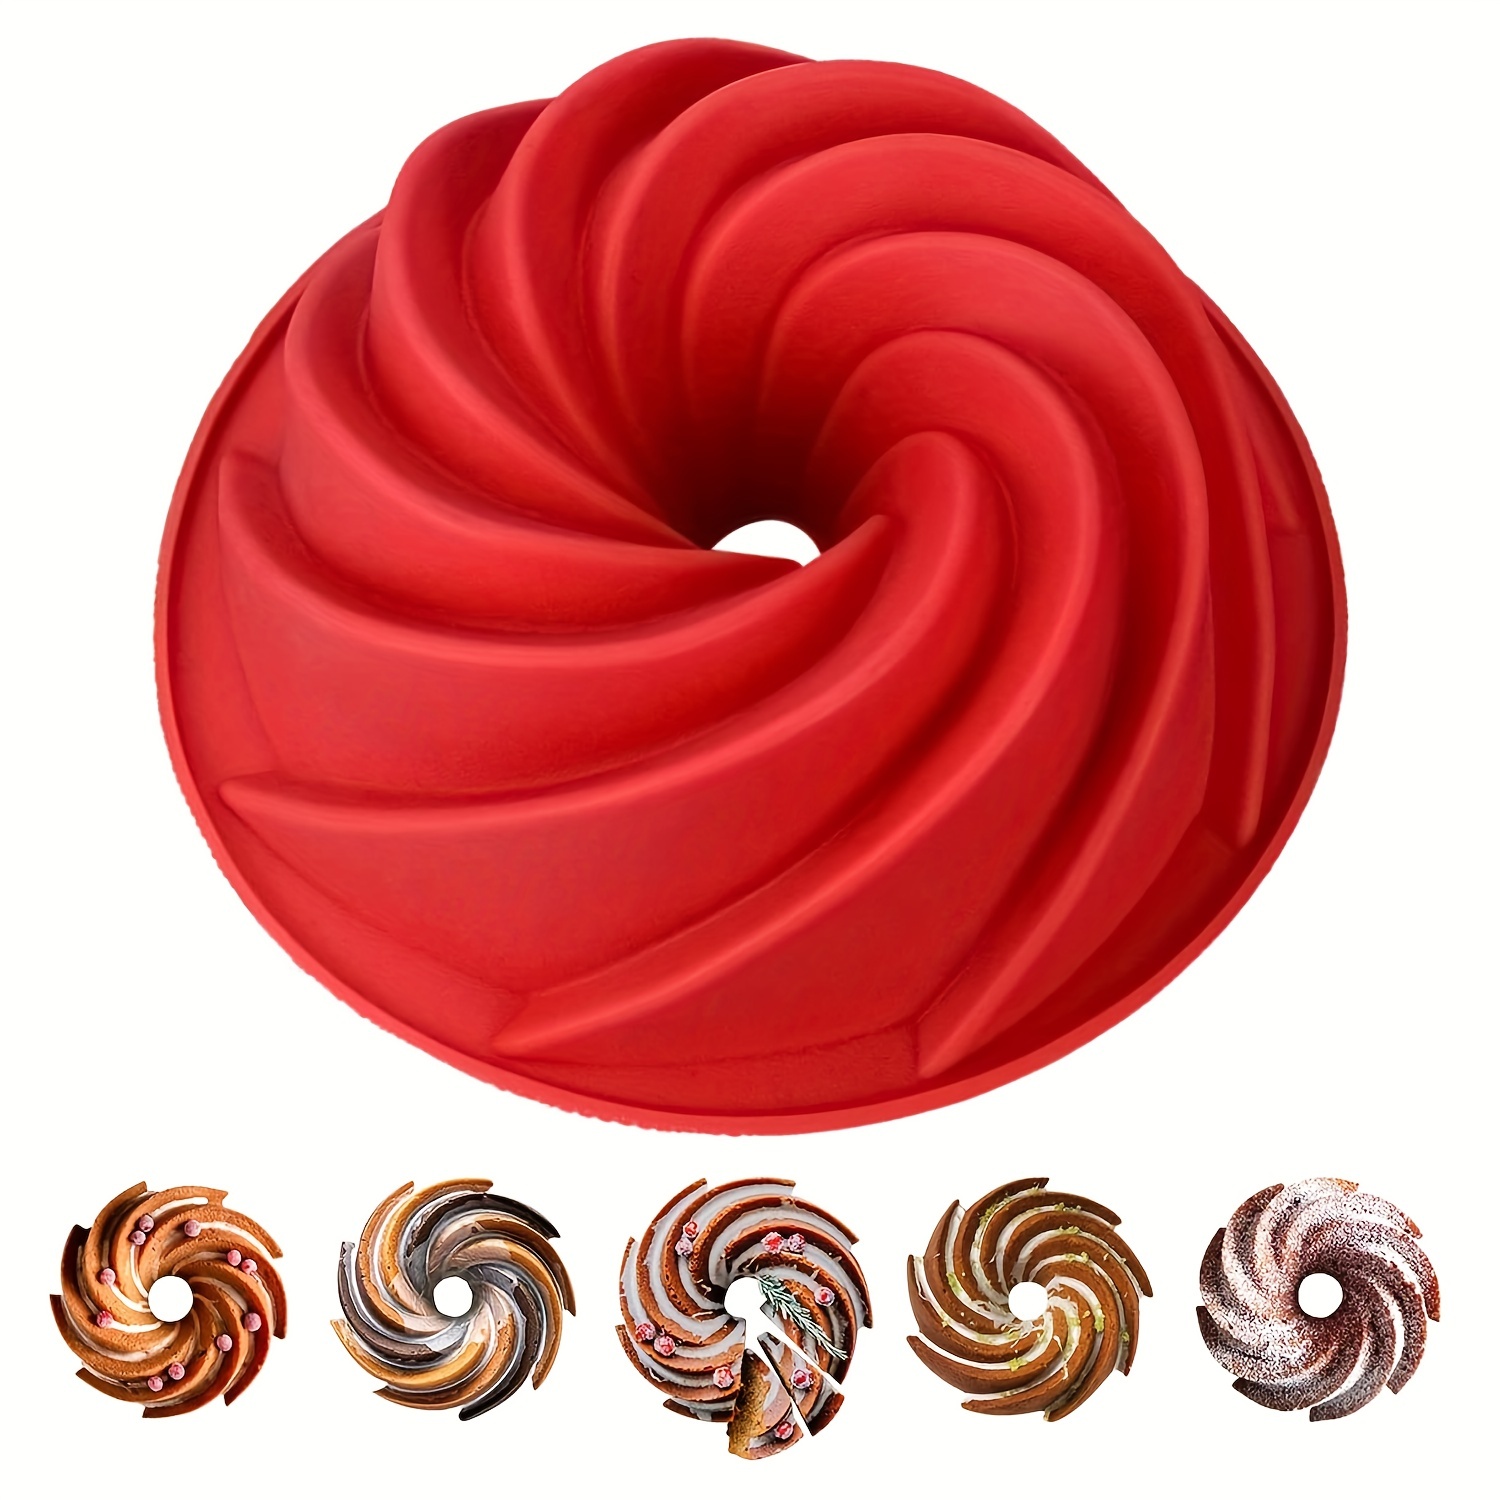 

1 Pc 9.5 Inch Colorful Cake Plate, Silicone Groove Para Gelatinas Cake Mold, Non-stick Cake Plate Spiral Design, Suitable For Cake Jelly Bread Birthday Party - Red